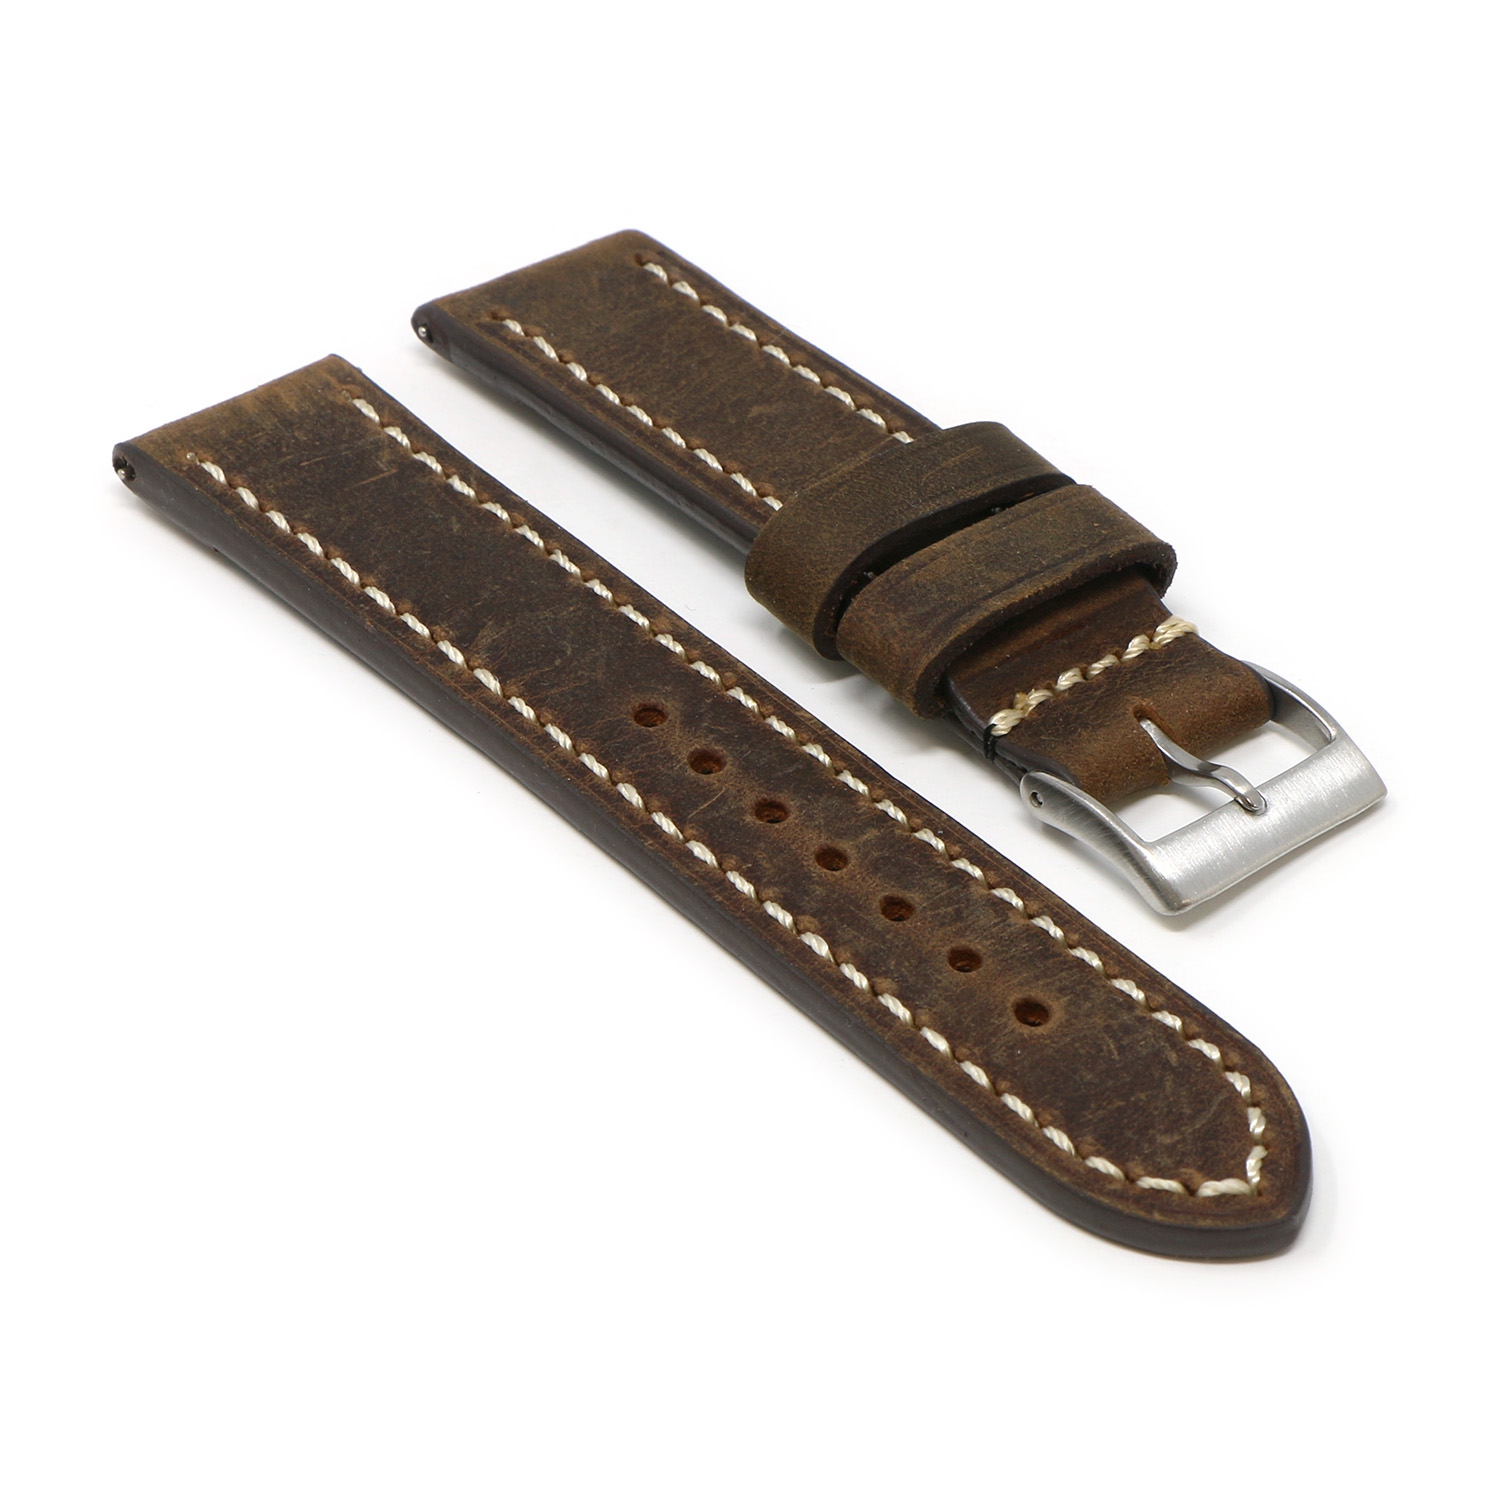 StrapsCo Vintage Leather Watch Band Strap (Short, Standard, Long) for Fitbit Charge 4 & Charge 3 - Standard - Classic Cigar